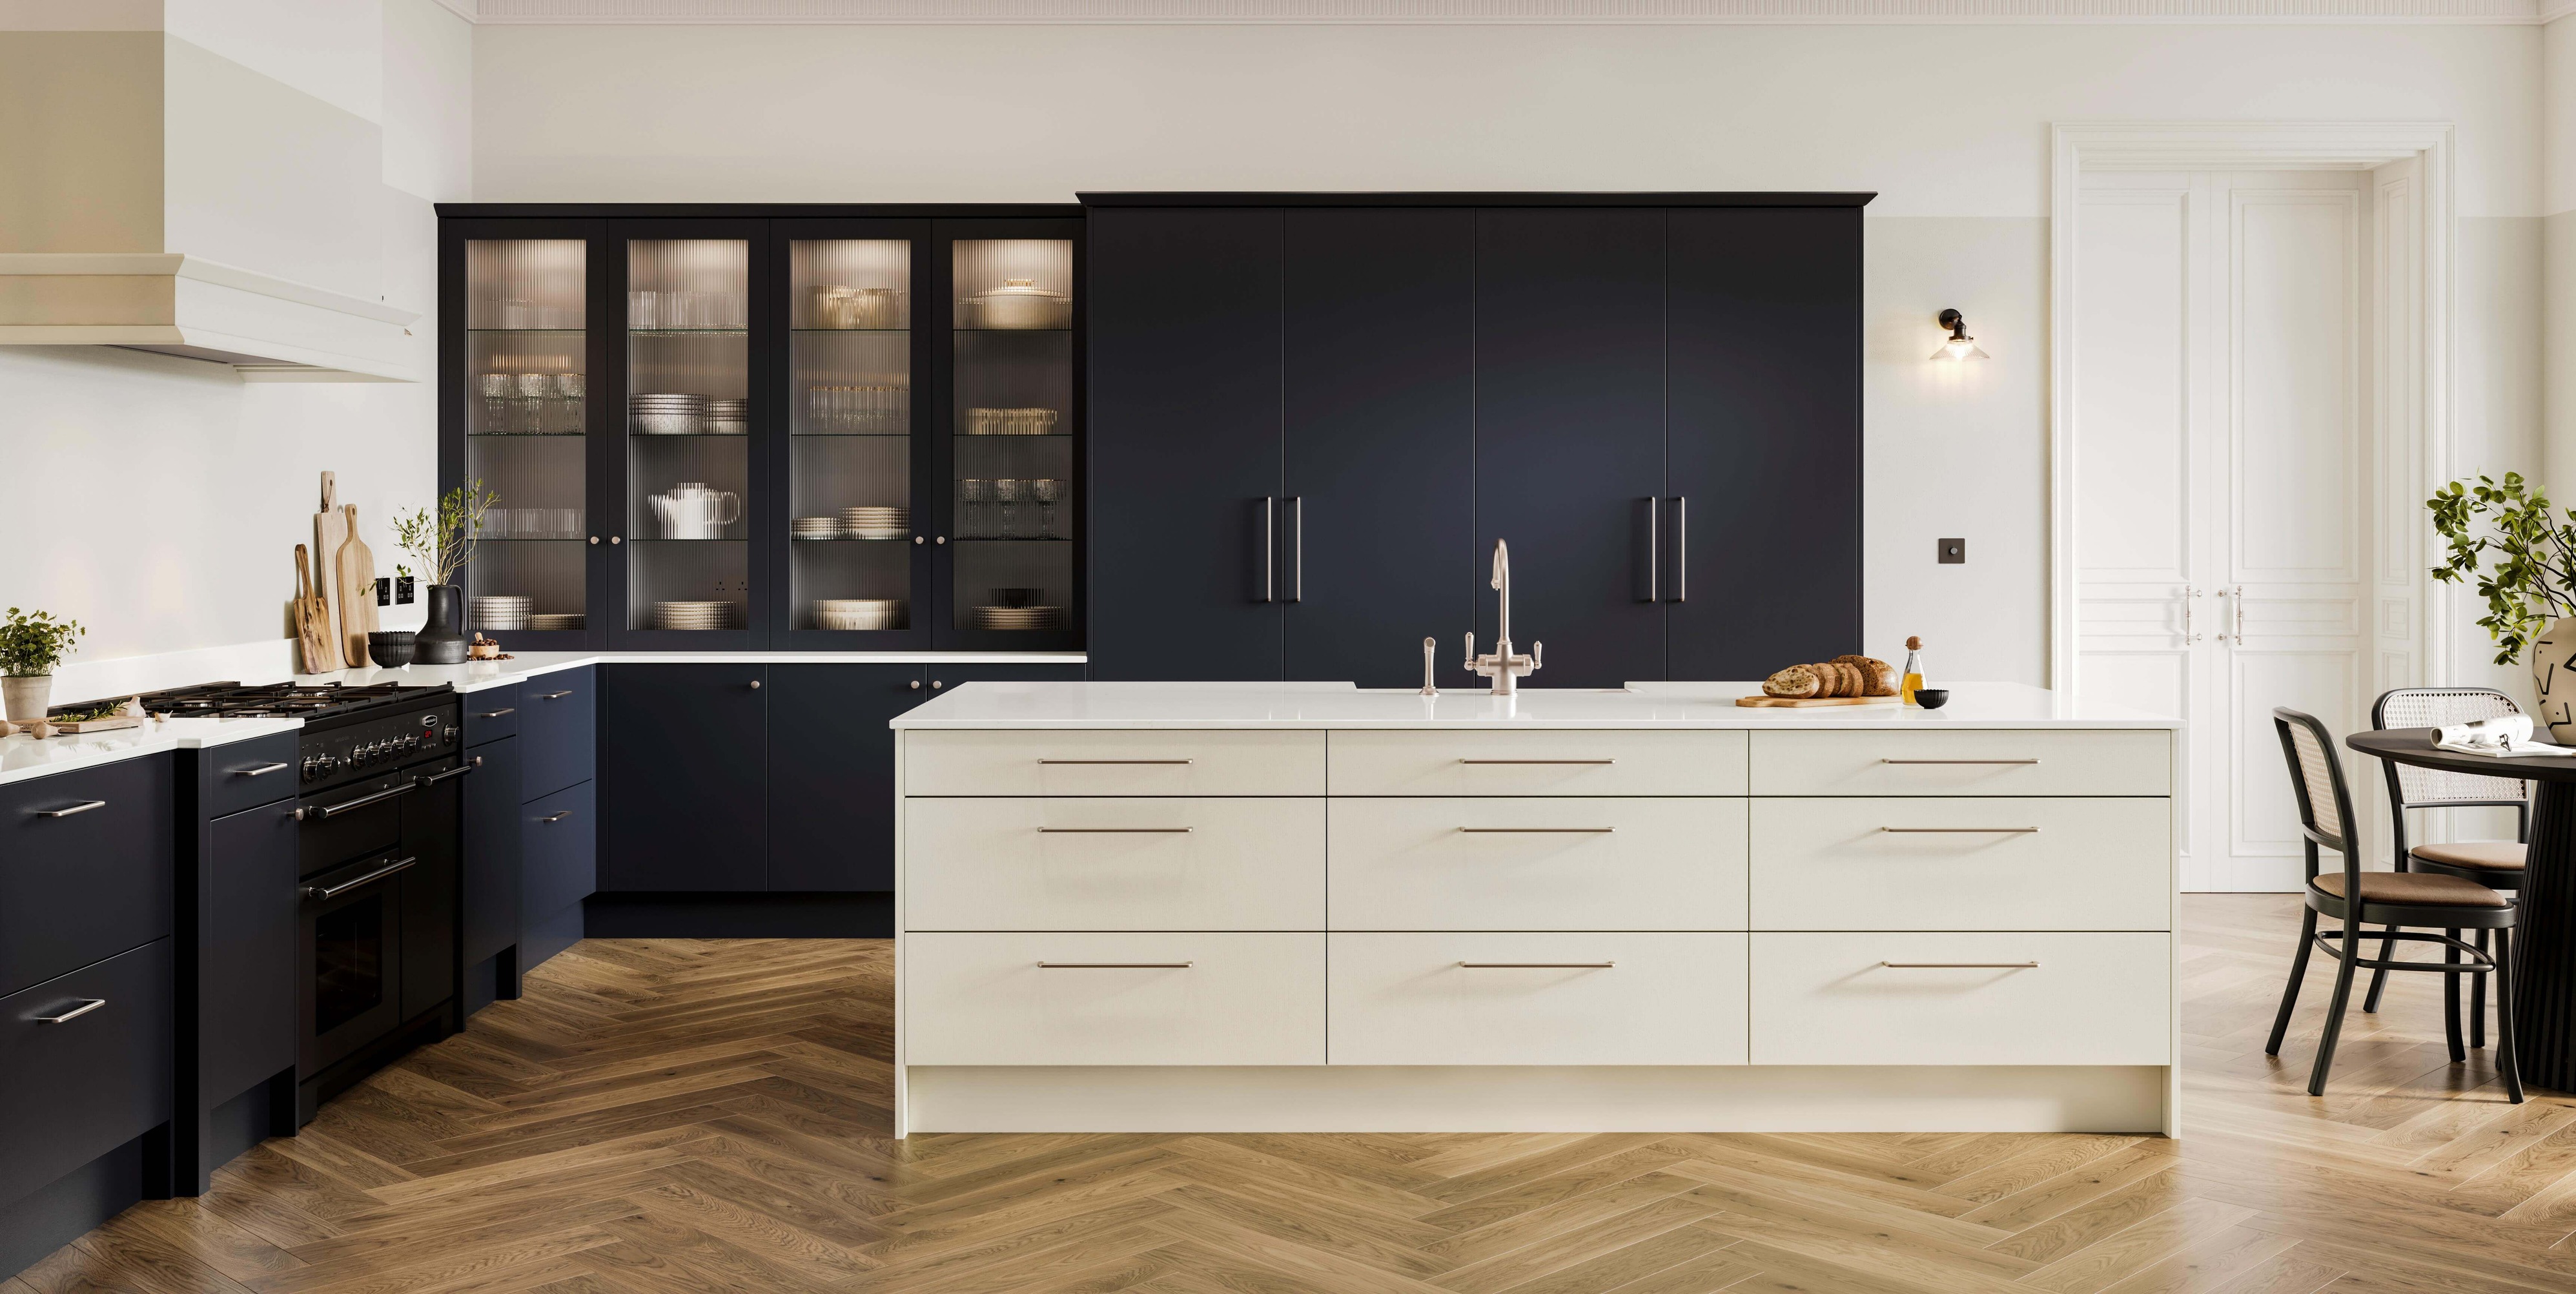 a modern kitchen with a slab door kitchen island painted in a pale grey with dark blue kitchen cabinets at the back